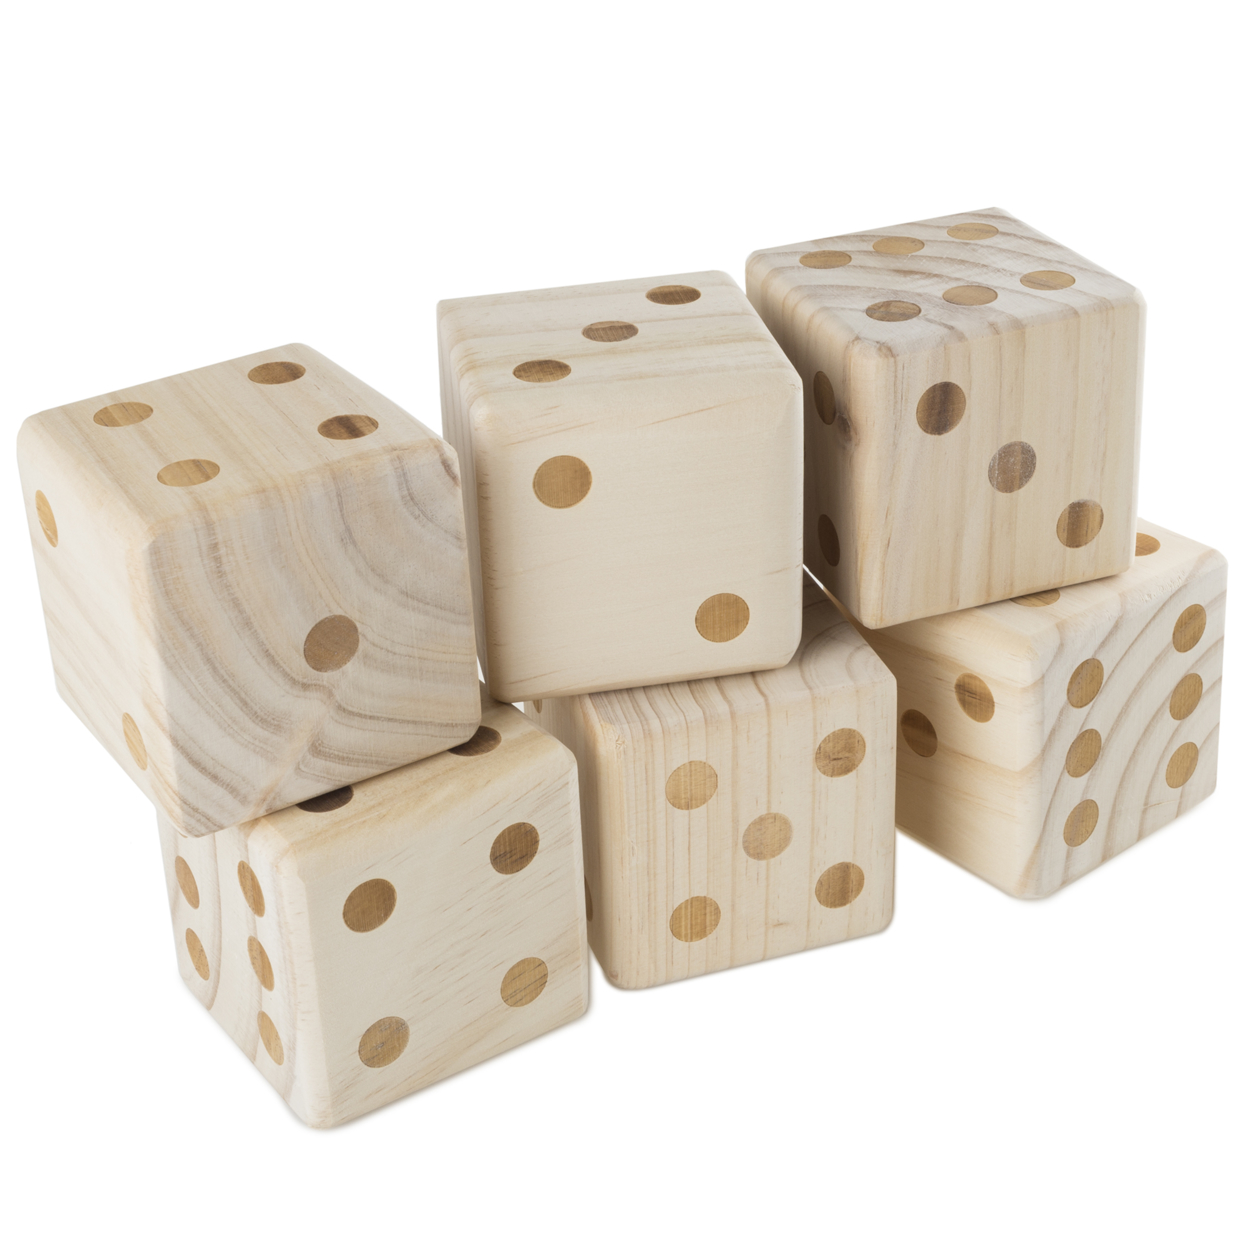 Giant Wooden Yard Dice Outdoor Lawn Game, 6 Playing Dice With Carrying Case For Kids And Adults 3.5 Inches Each